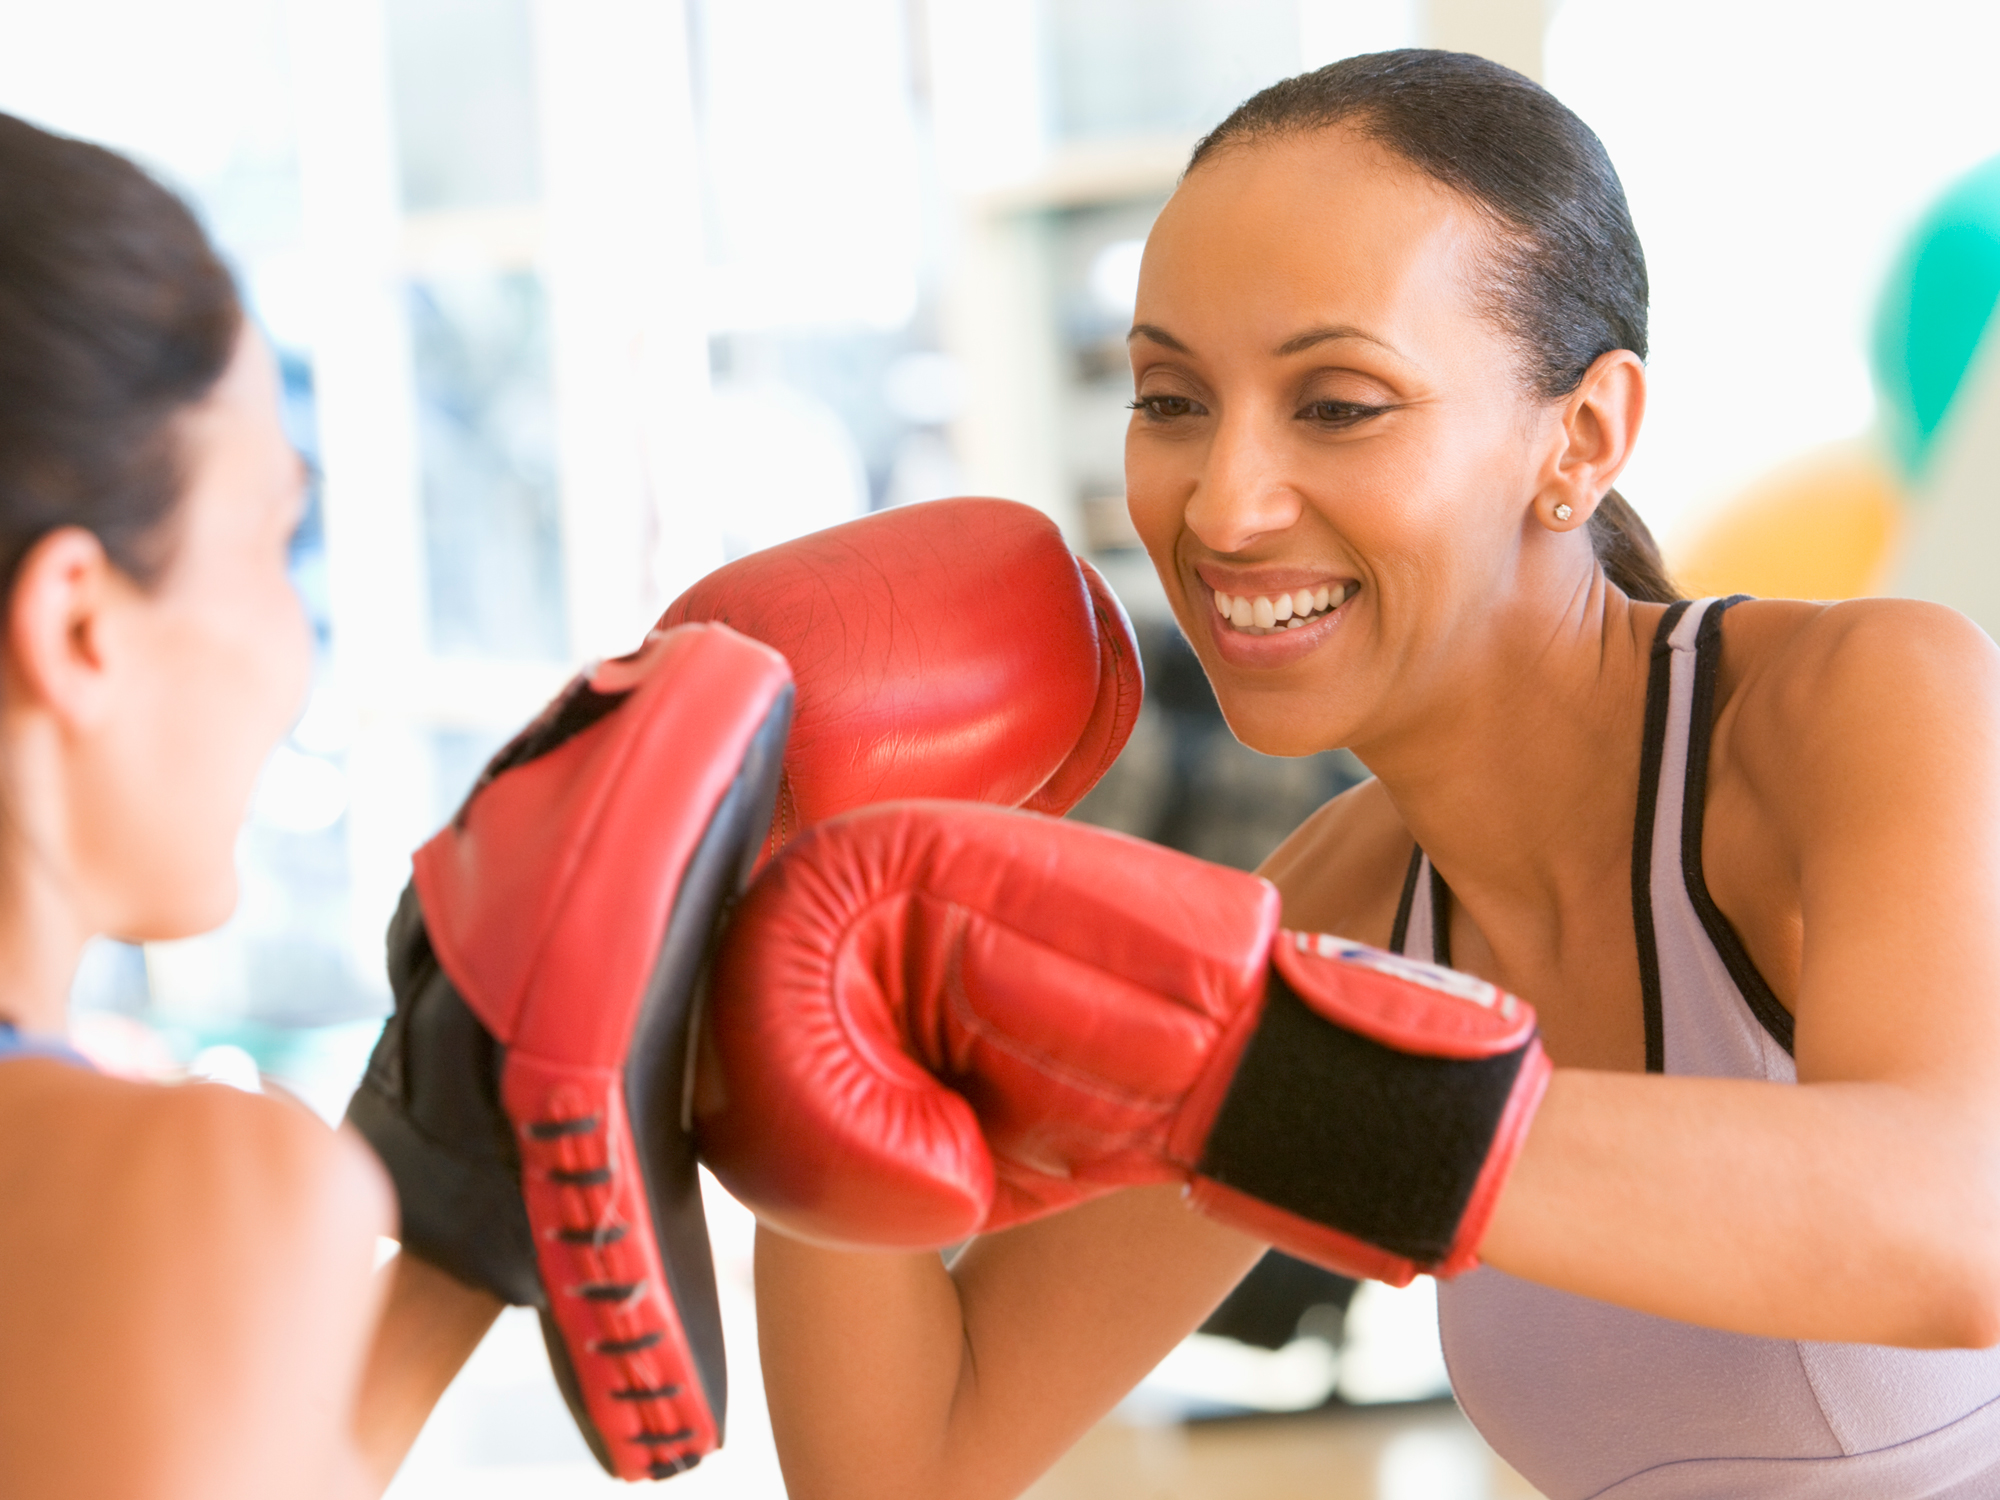 Throw a few punches to boost your cardio